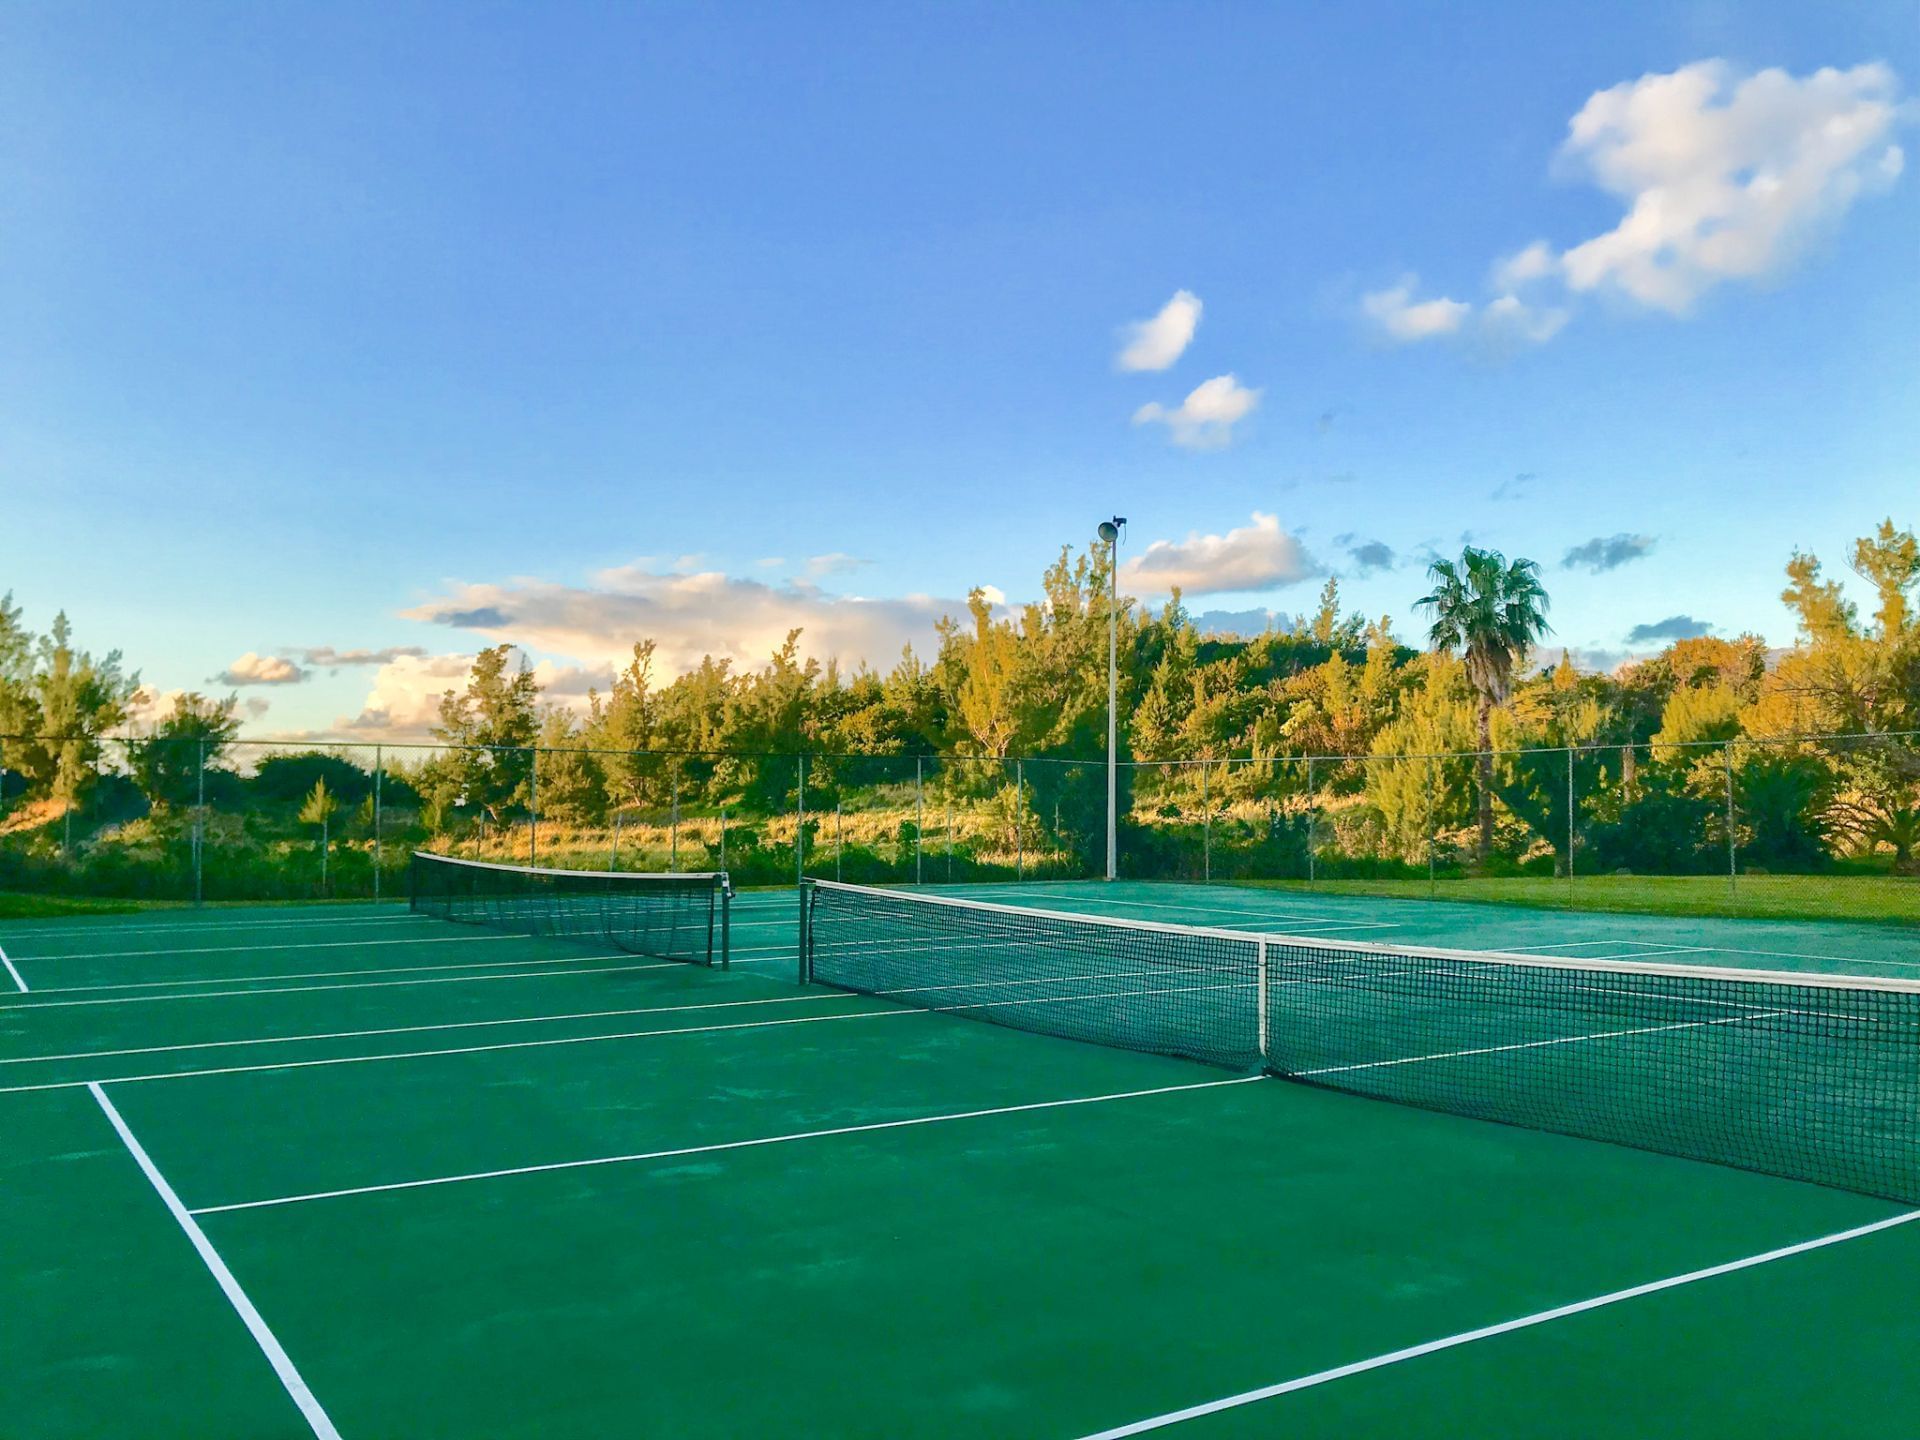 Outdoor spacious Tennis court at St George's Club Bermuda Hotel